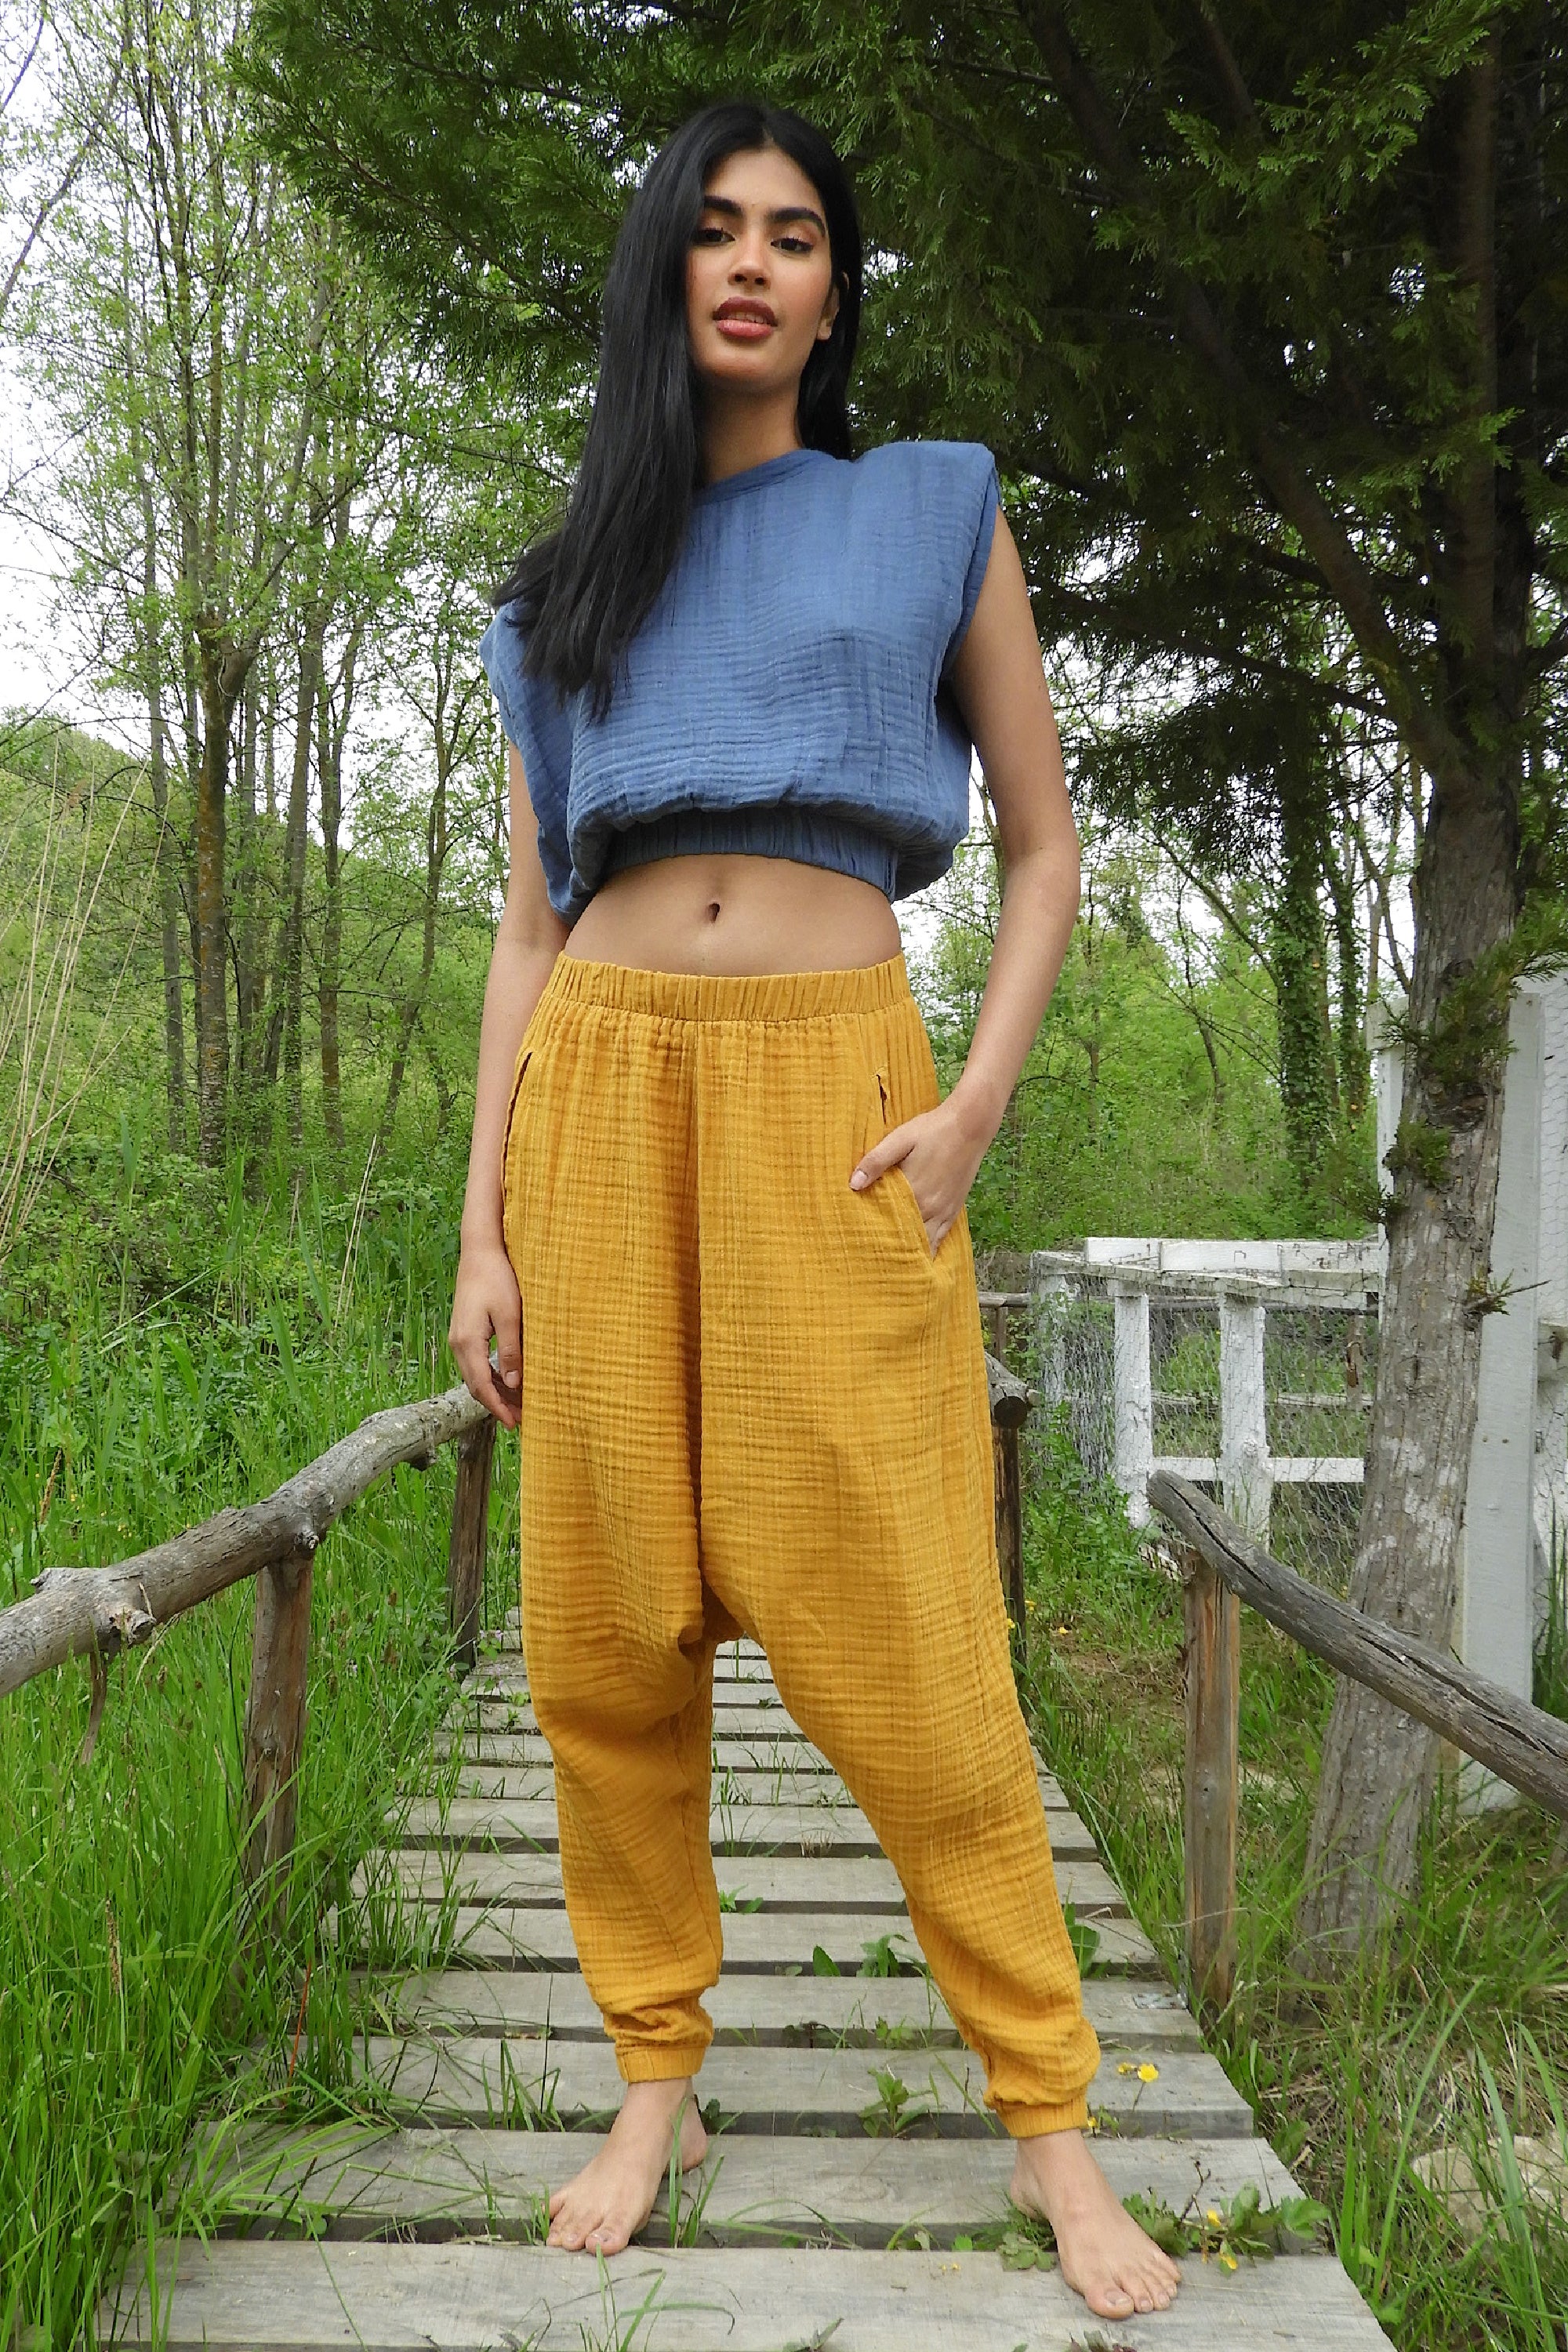 Buy Gorgerous Mumul Mustard Gathered Afghani Pants for Women